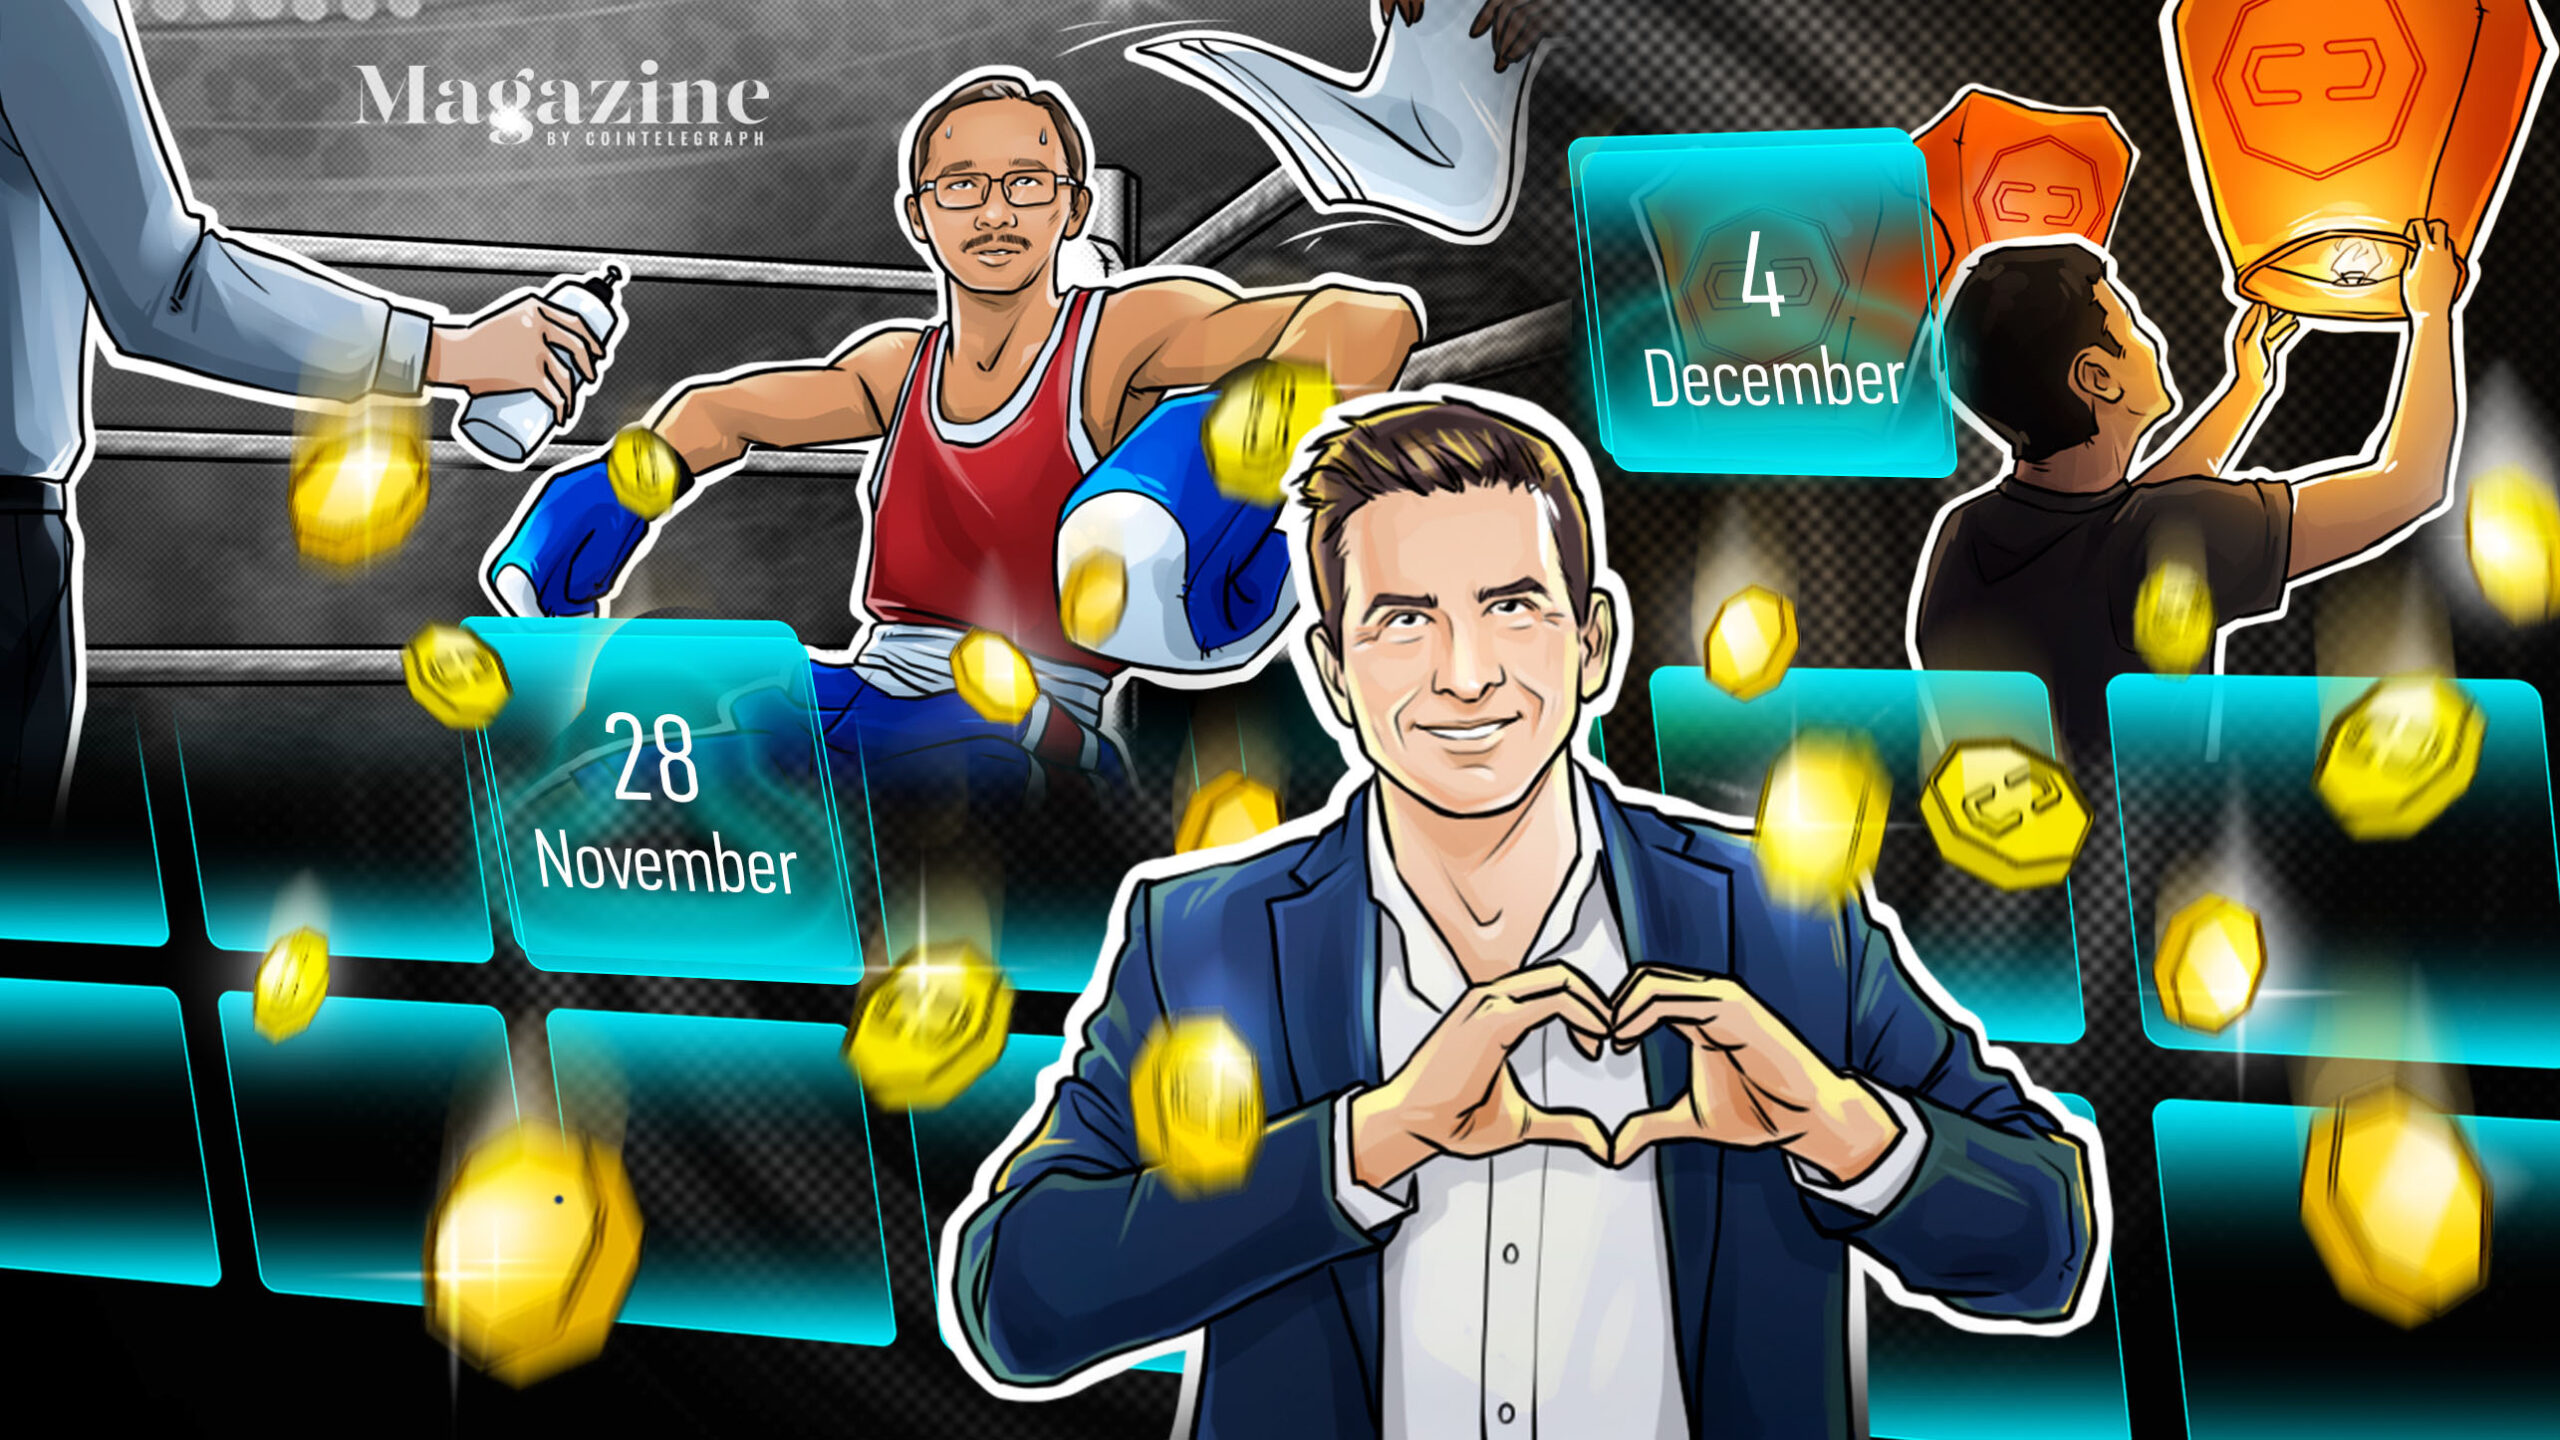 Vitalik Buterin outlines path to ETH 2.0, Visa launches crypto advisory service, Biden’s anti-crypto nominee for Comptroller withdraws: Hodler’s Digest, Dec. 5-11